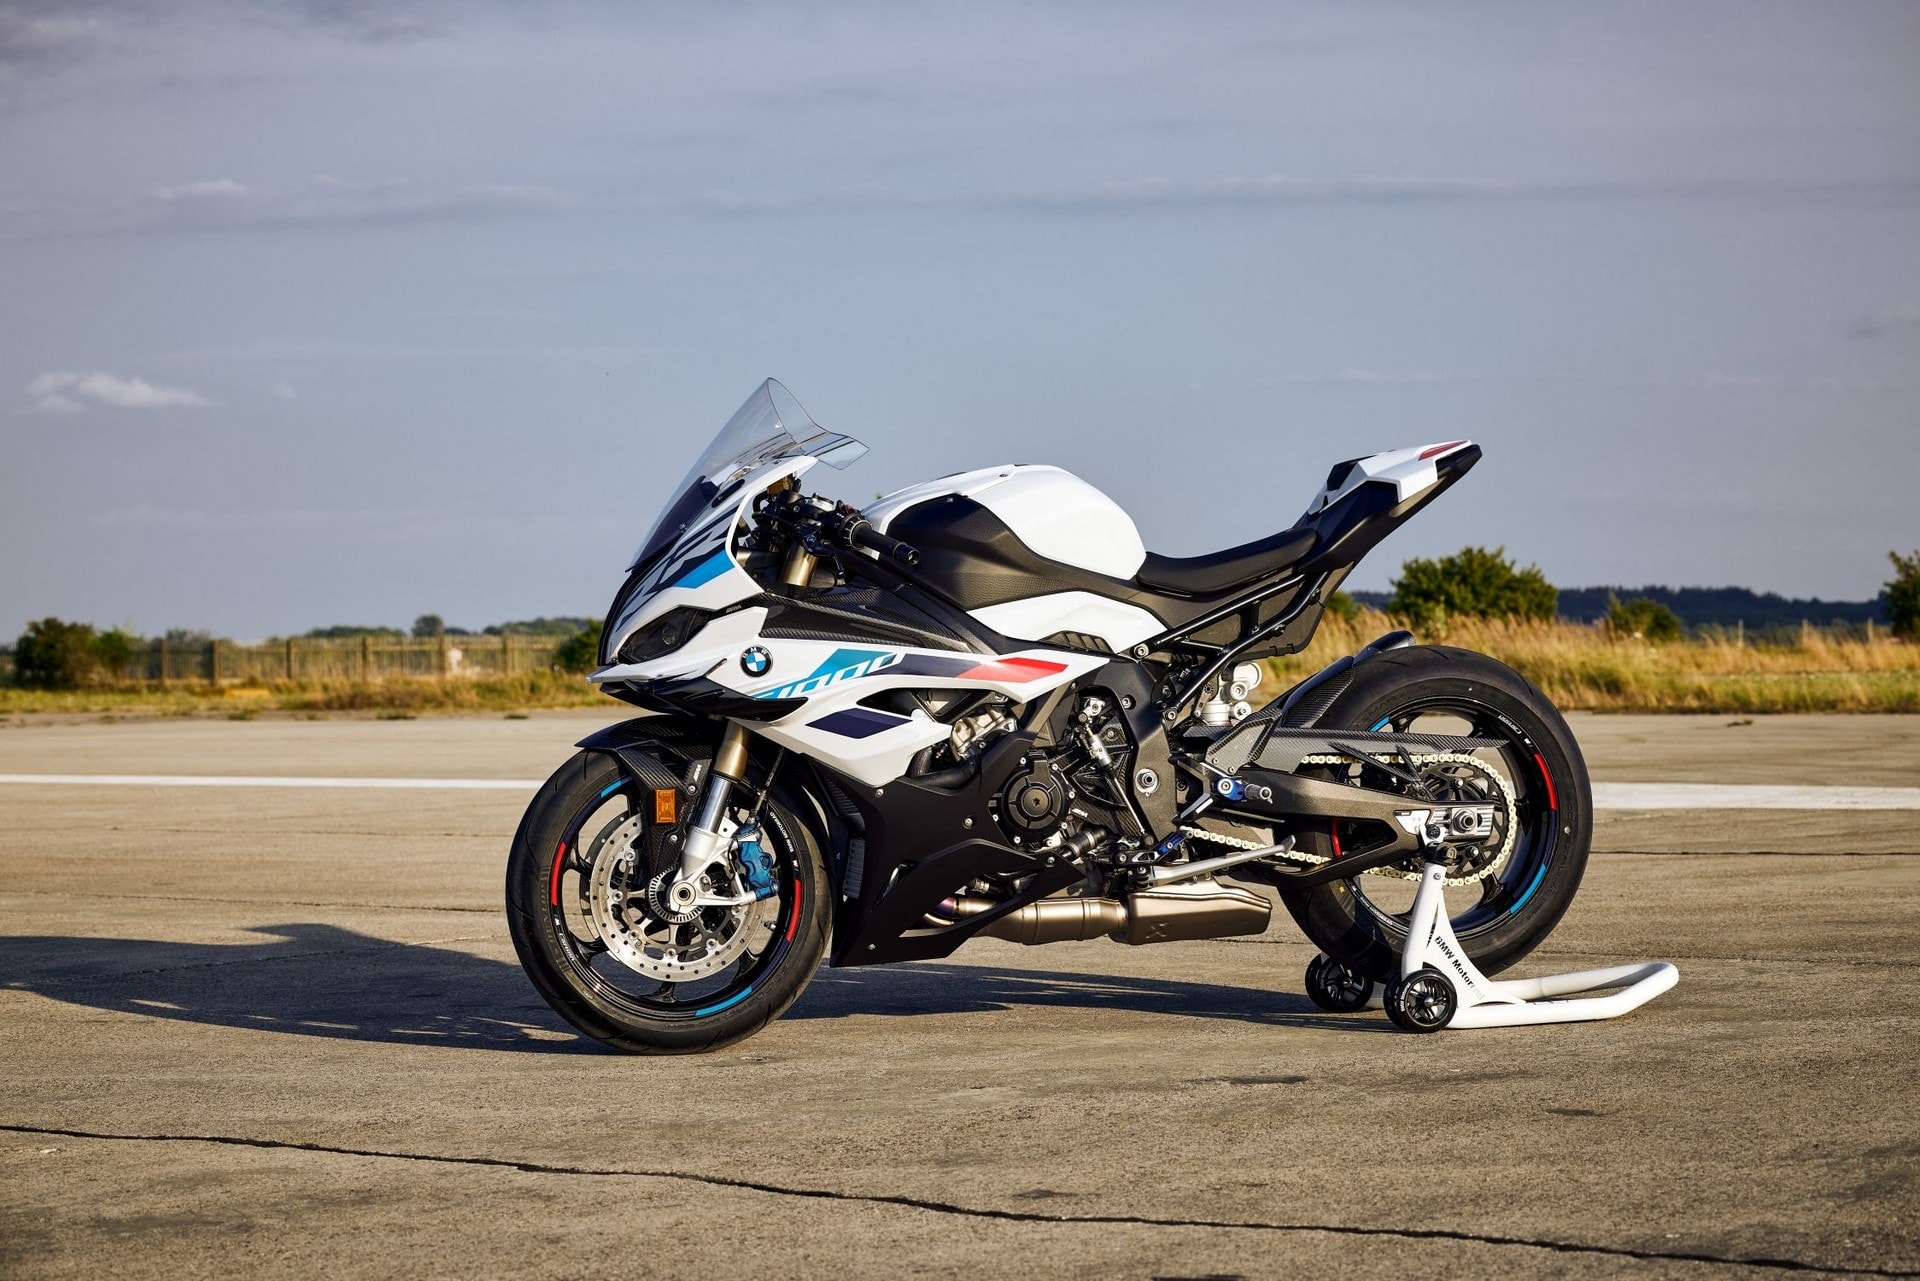 Tame the Wheelie: The New BMW S 1000 RR Superbike Has More Safety